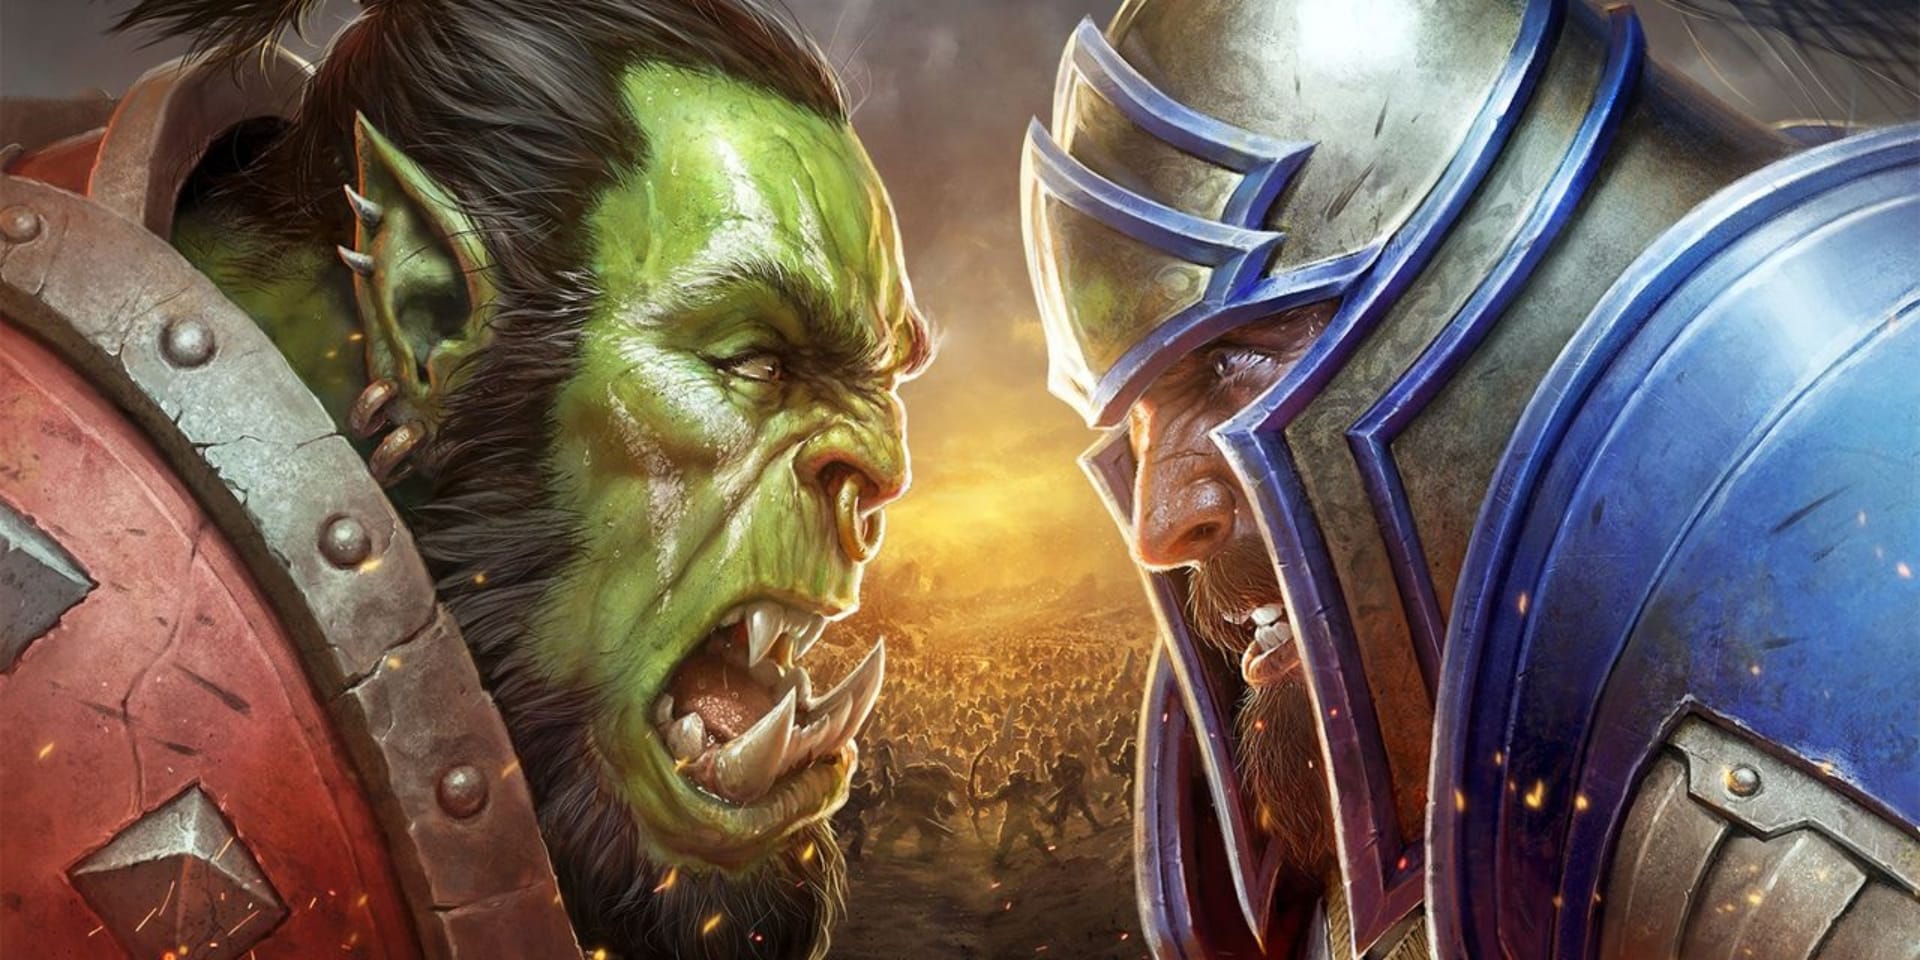 world-of-warcraft-mobile-is-cancelled-gamersRD (1)